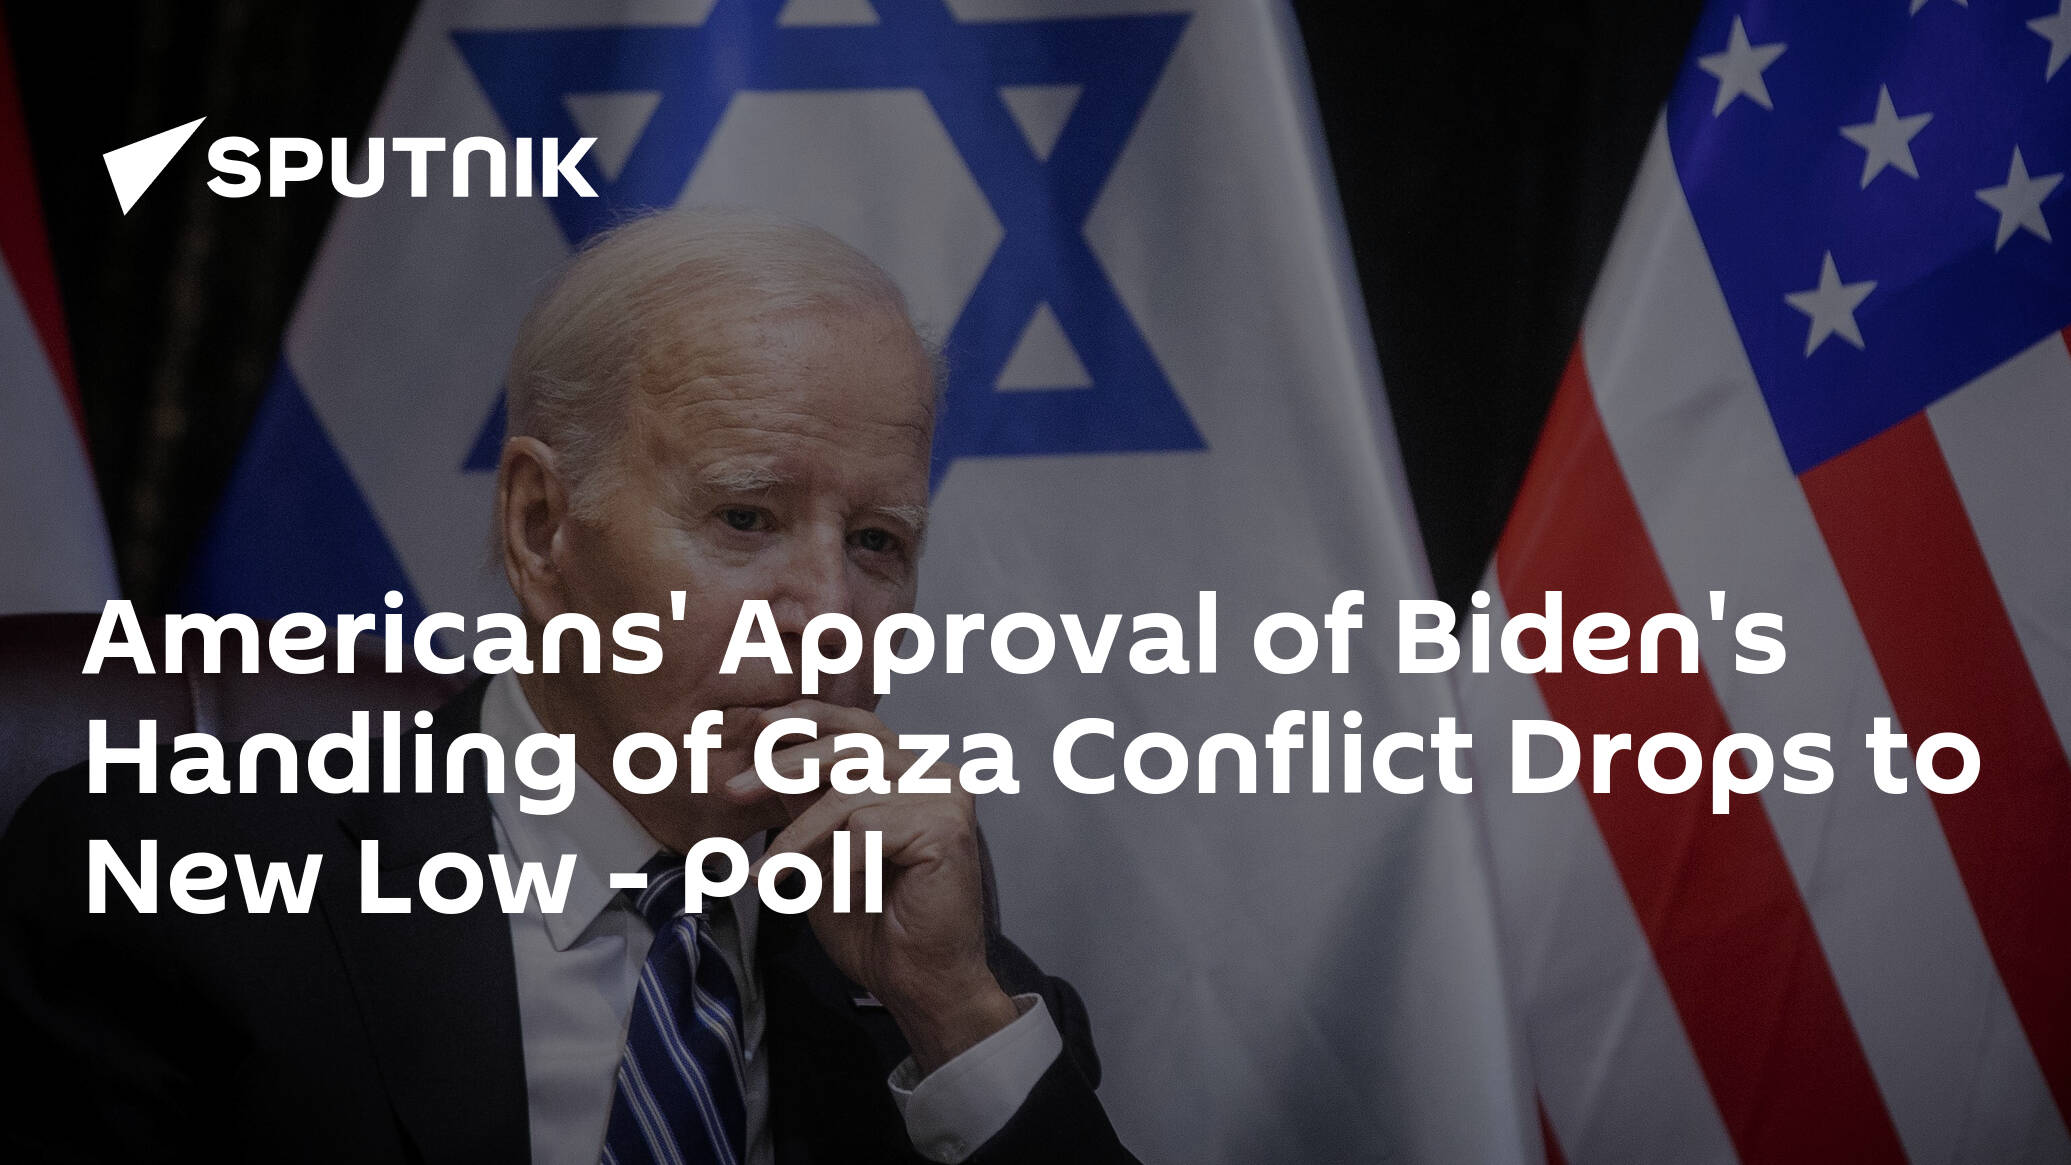 Americans' Approval of Biden's Handling of Gaza Conflict Drops to New Low – Poll